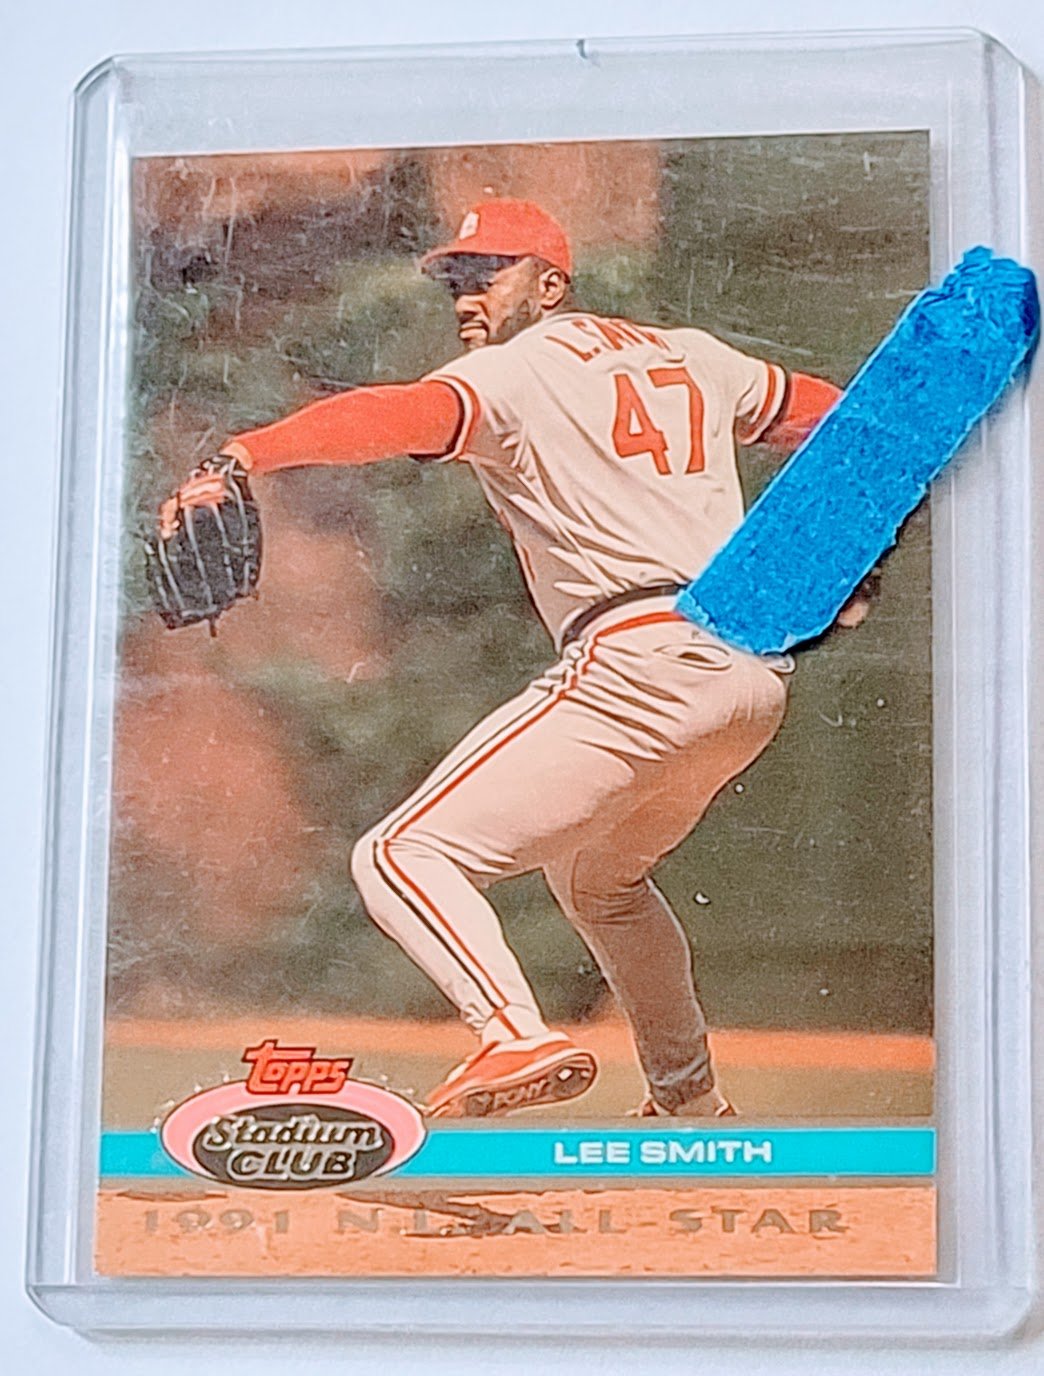 1992 Topps Stadium Club Dome Lee Smith 1991 All Star MLB Baseball Trading Card TPTV simple Xclusive Collectibles   